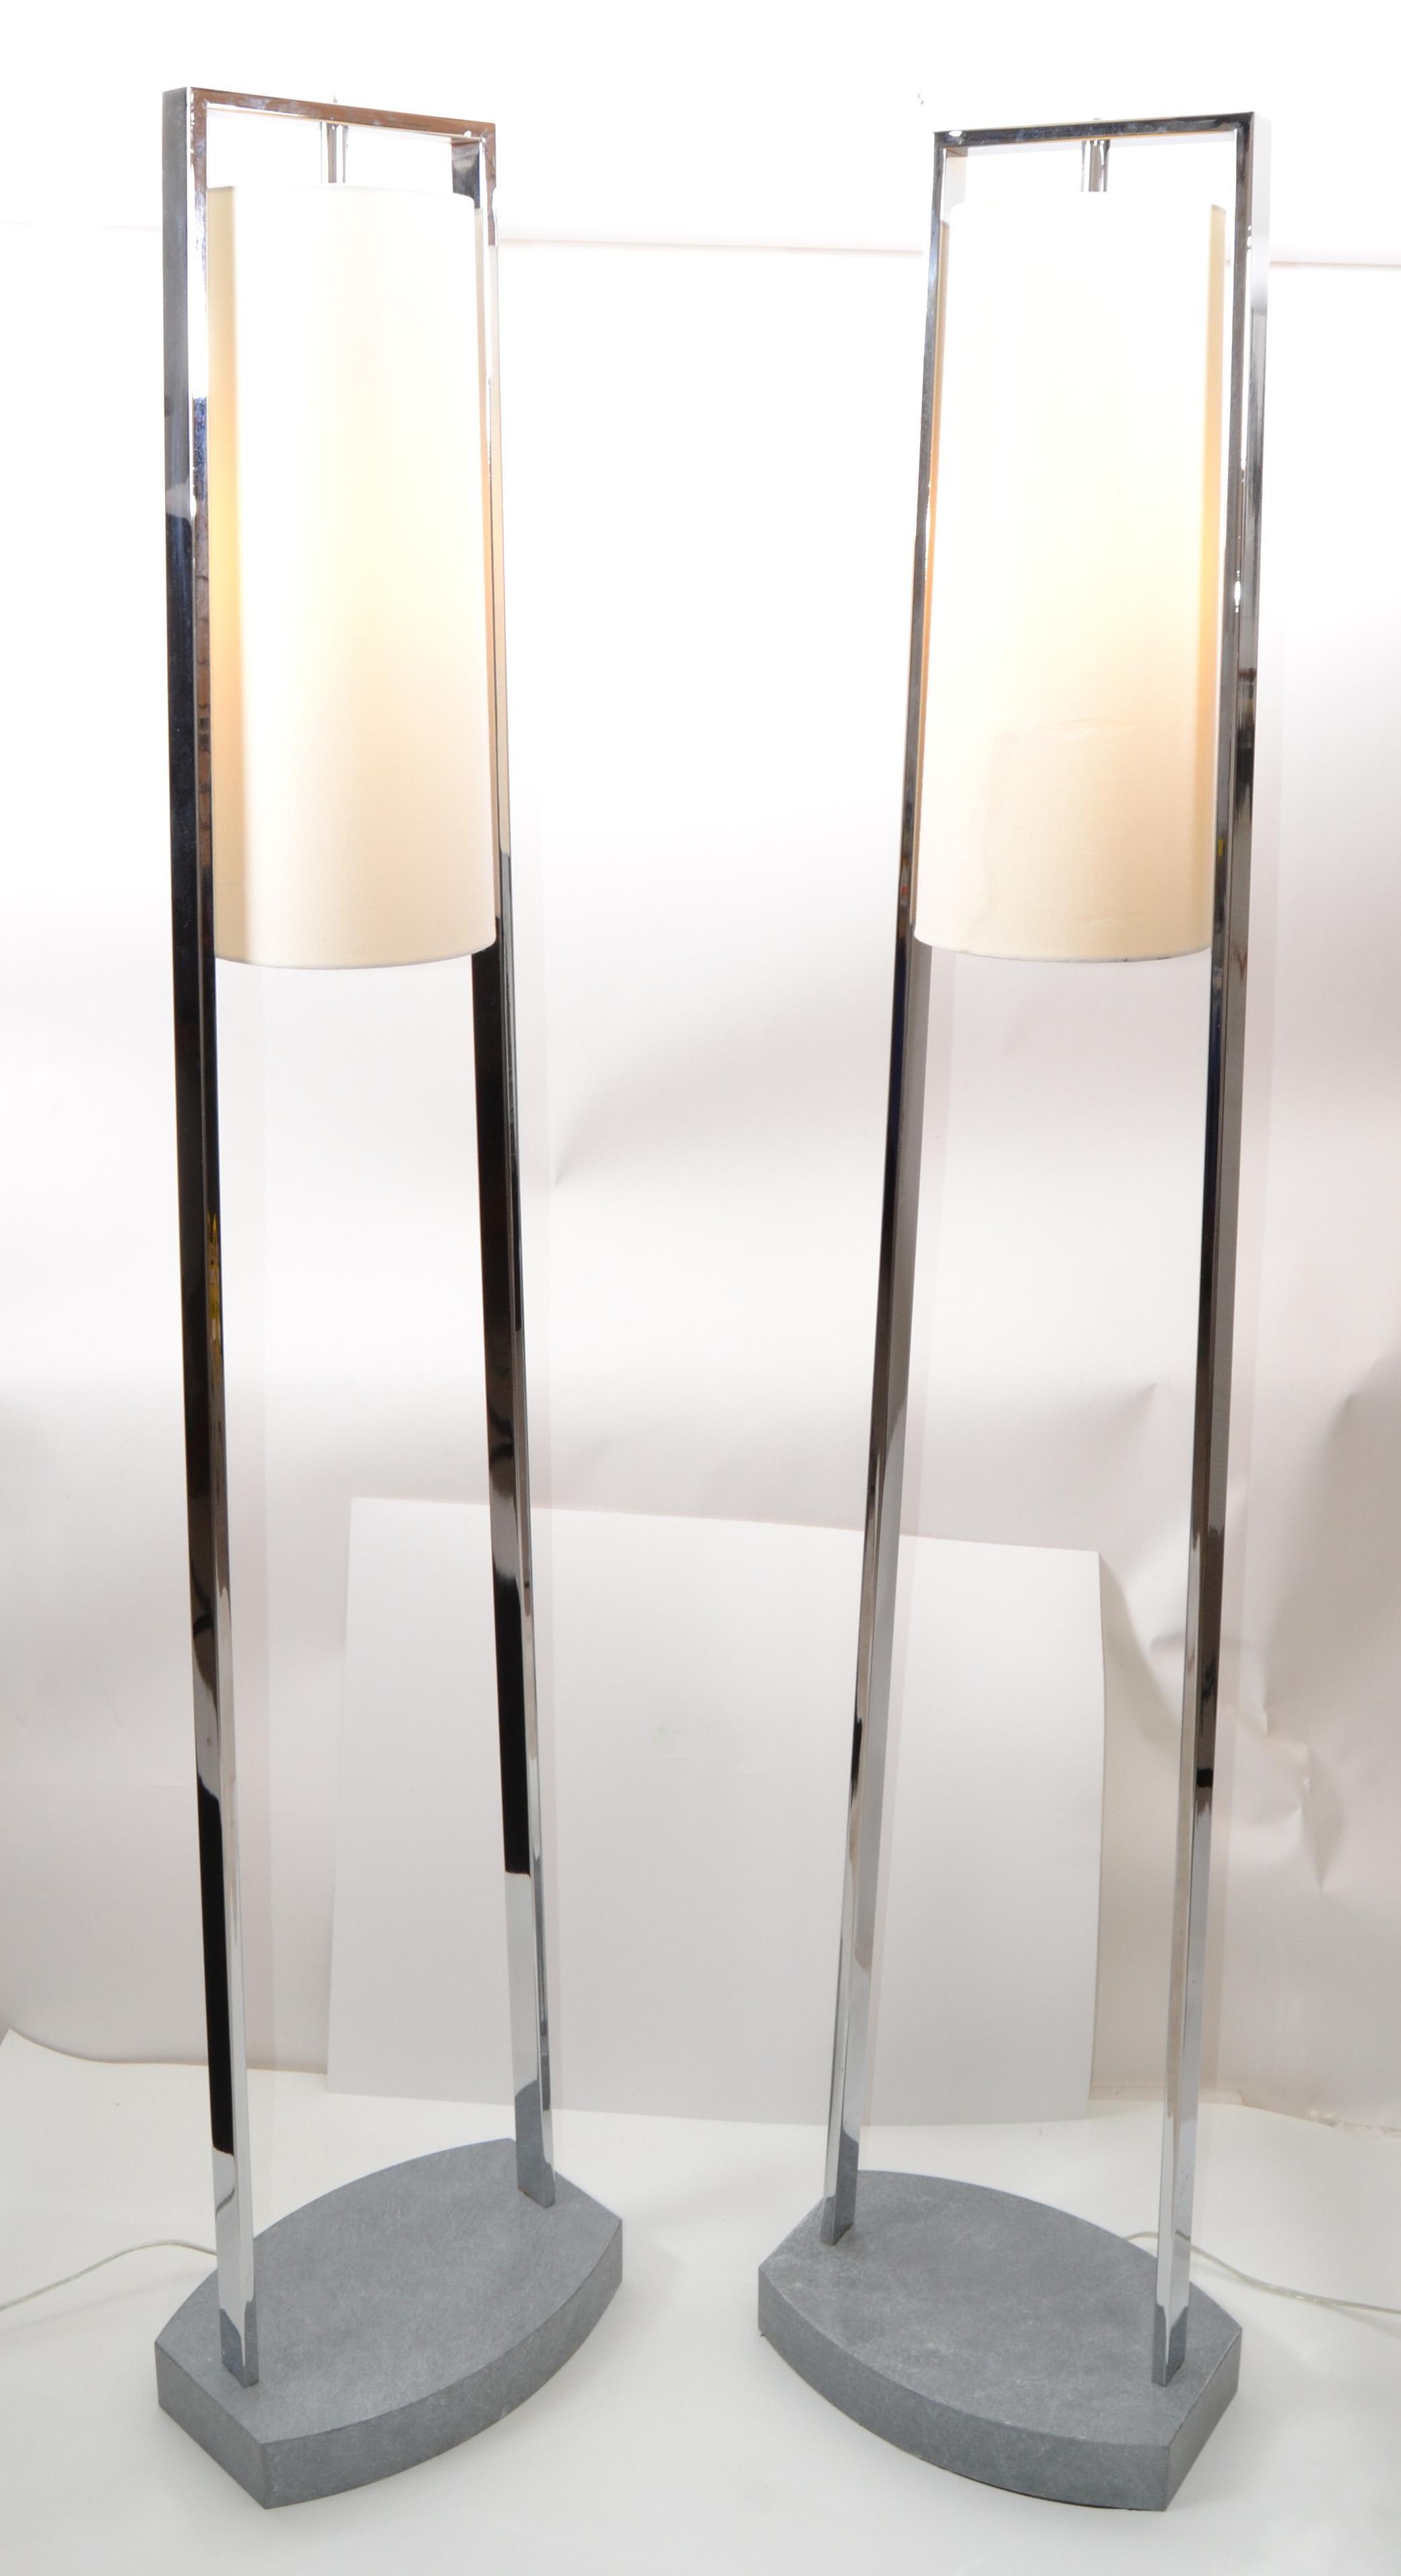 A pair of tall modern Van Teal chrome floor lamps with cylindrical white linen hardback shades. Sturdy mounted on a faux green gray marbleized stone base.
In perfect working condition and each uses a large halogen bulb.
Note: No off / on